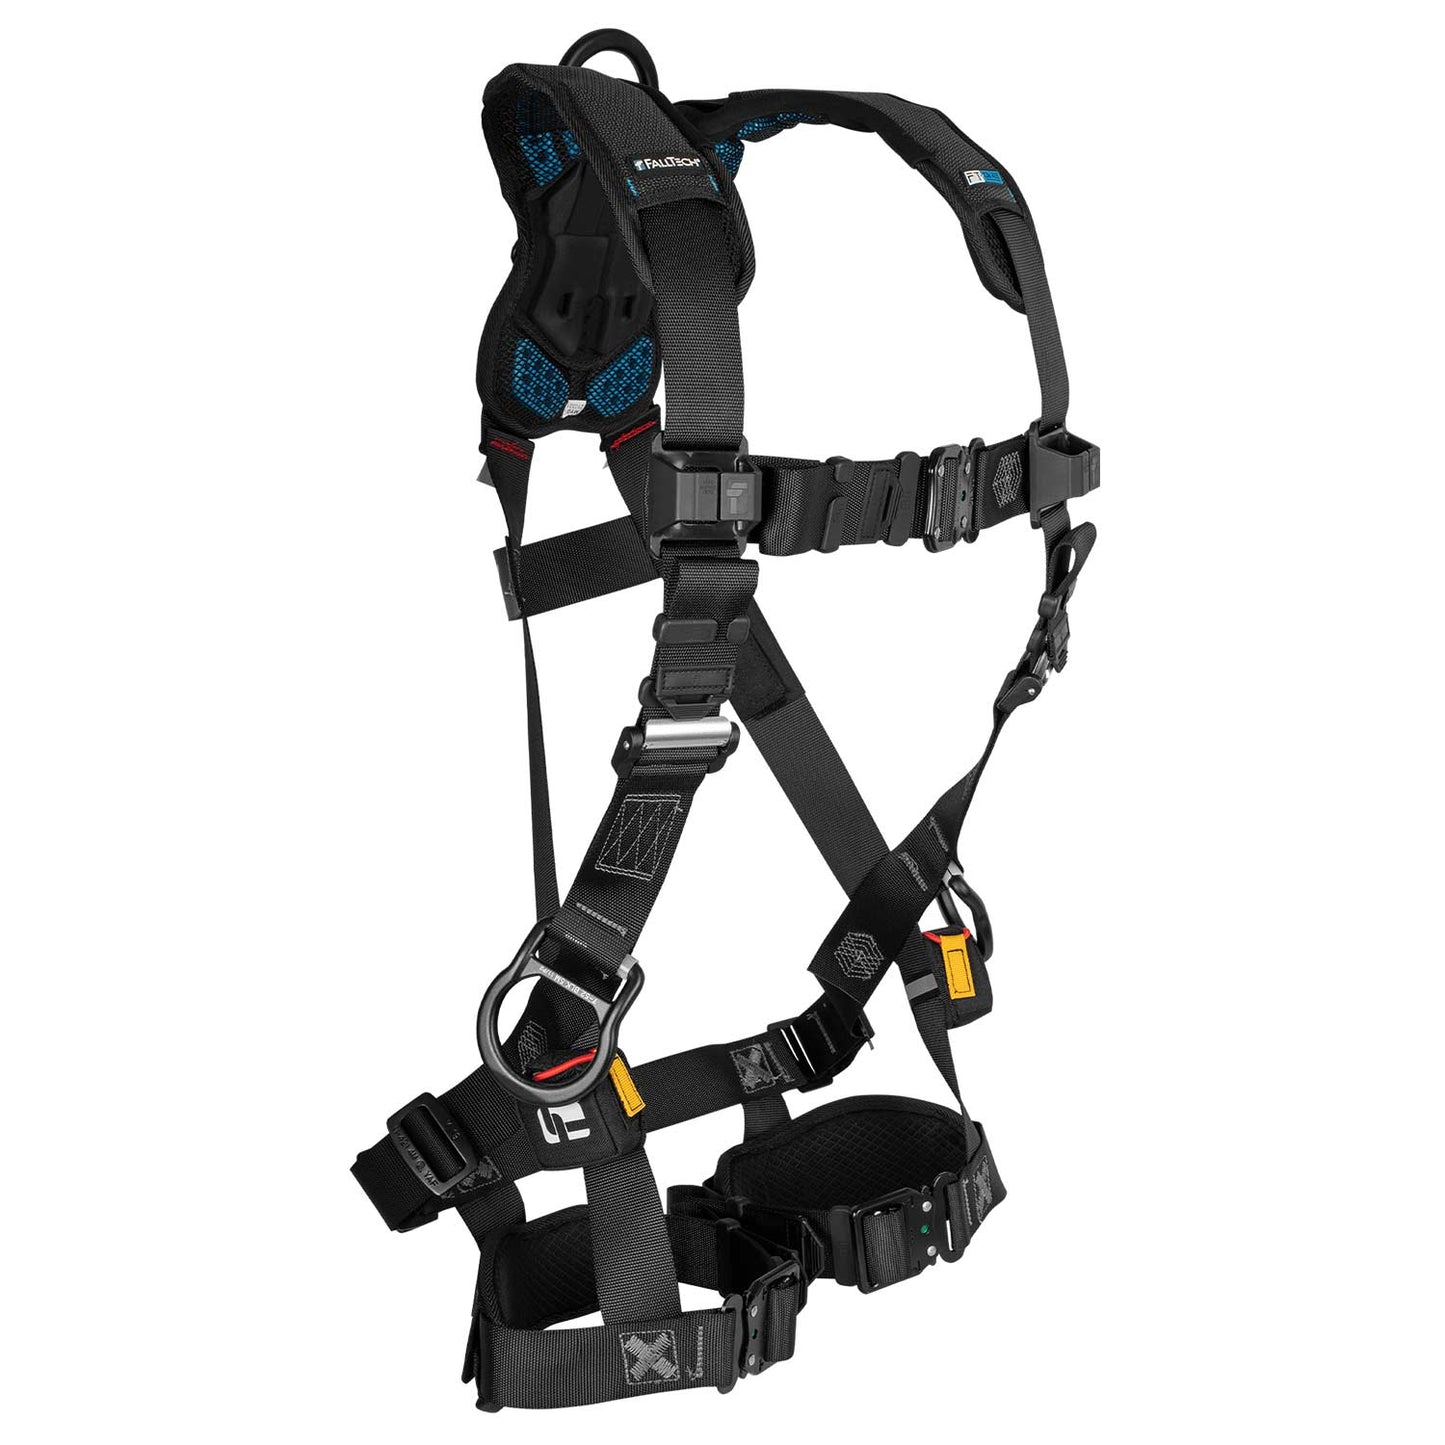 FallTech FT-One Fit Women's Safety Harness w/ Trauma Straps | Non-Belted | XS | 8129QCXS